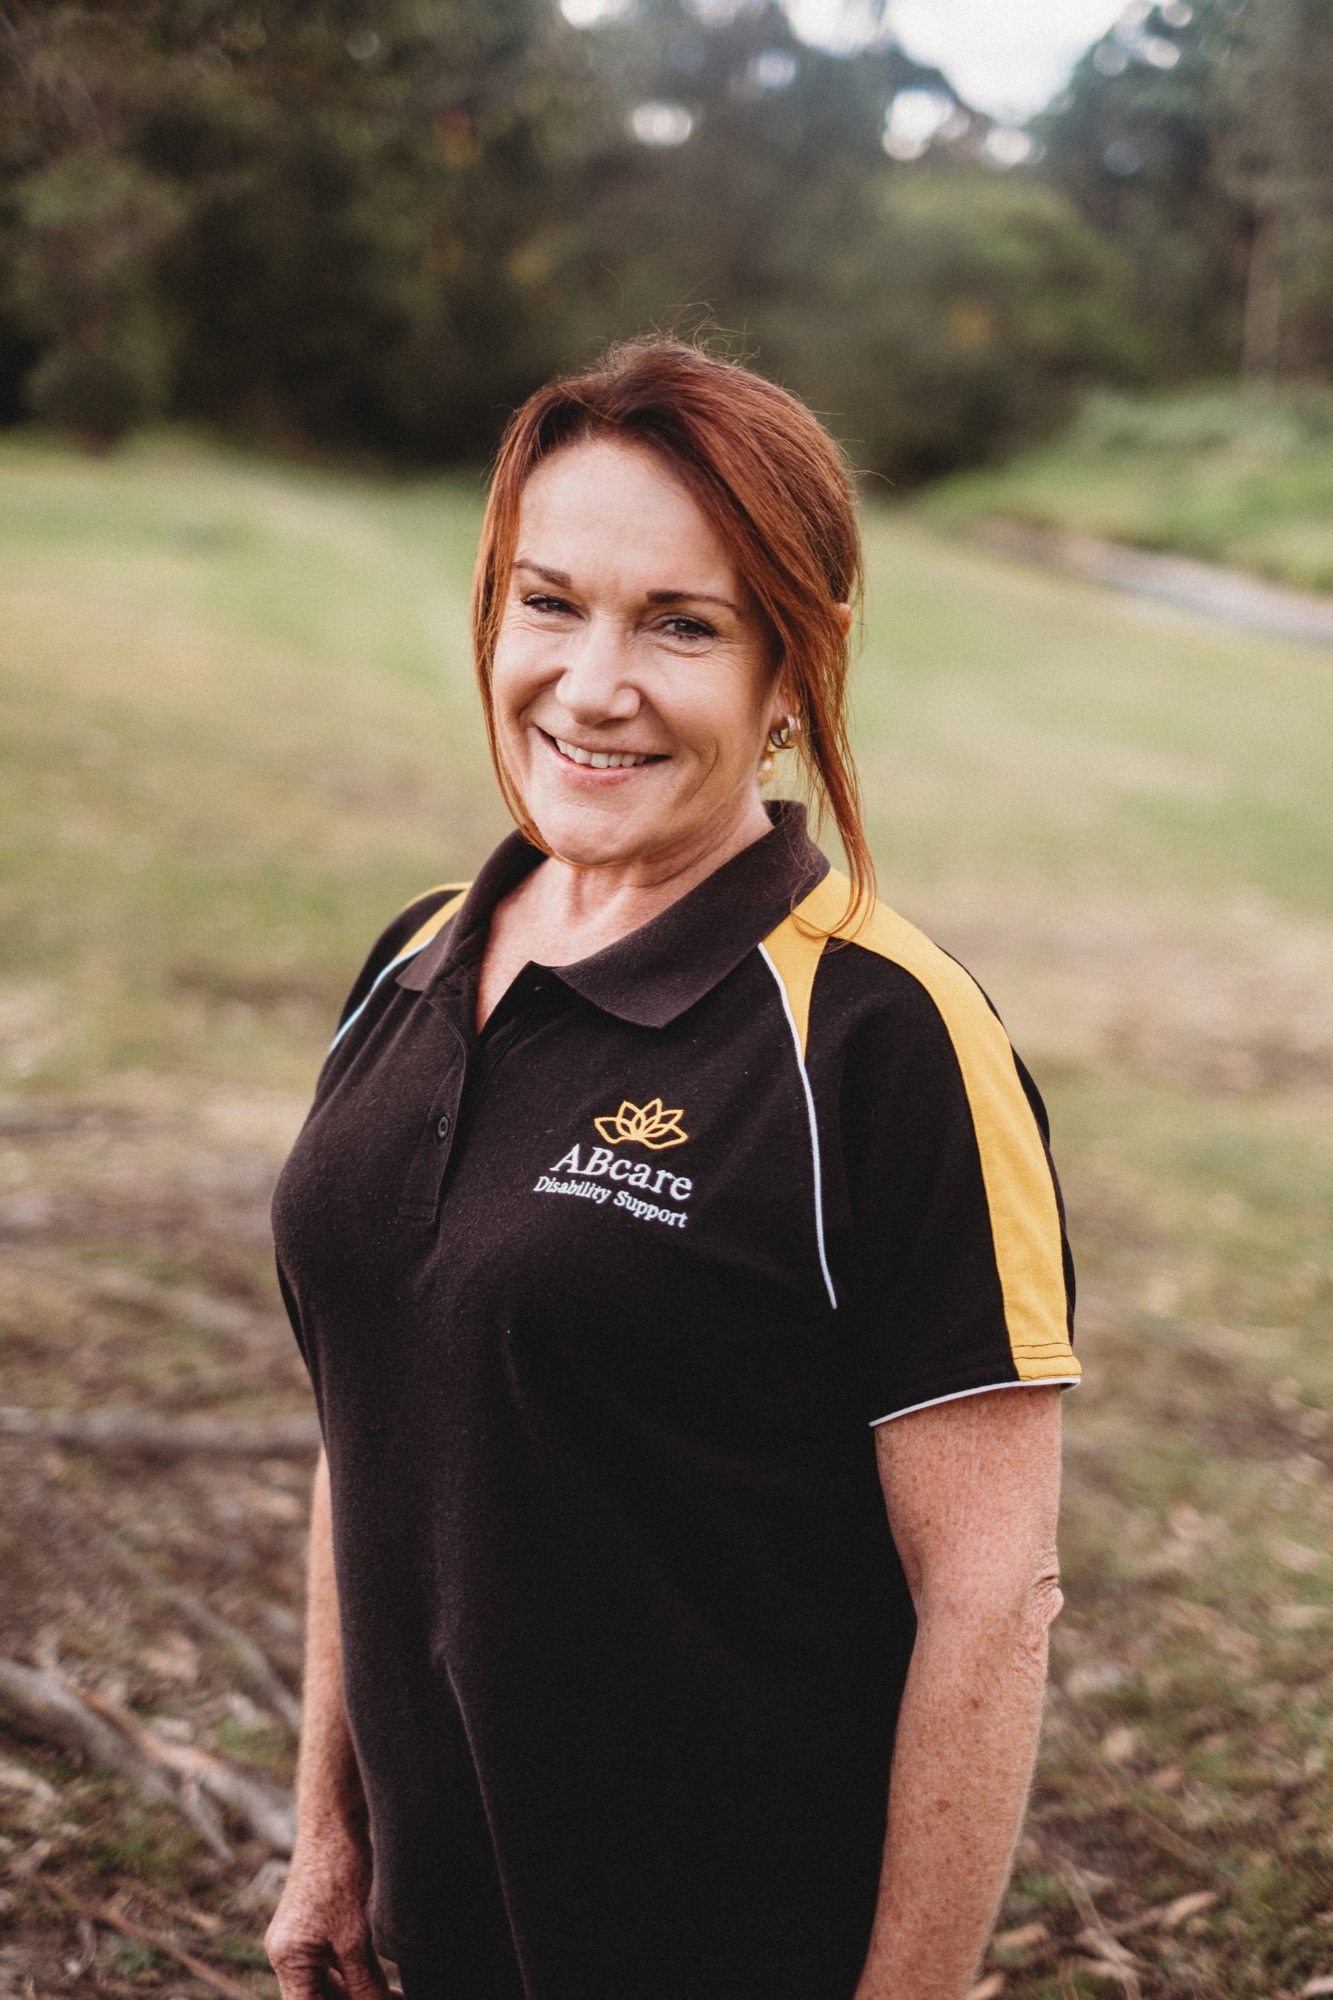 Tania ABCARE - Disability Support Provider